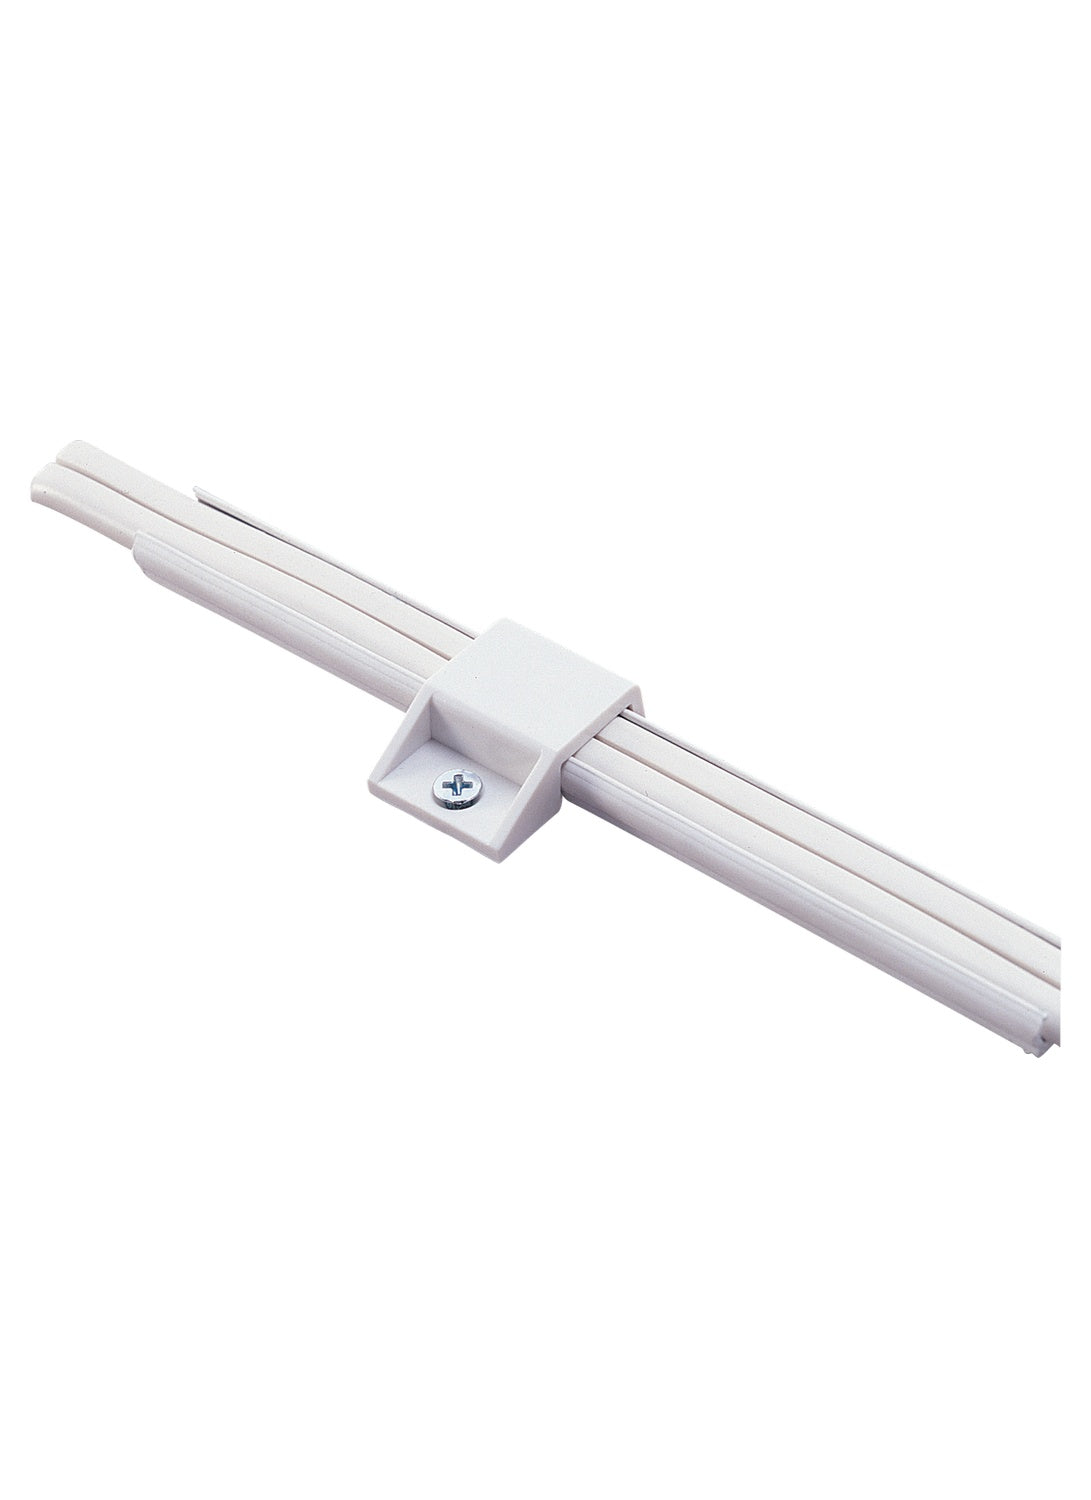 Generation Lighting Canada. - Track Mounting Clip - Lx Components - White- Union Lighting Luminaires Decor